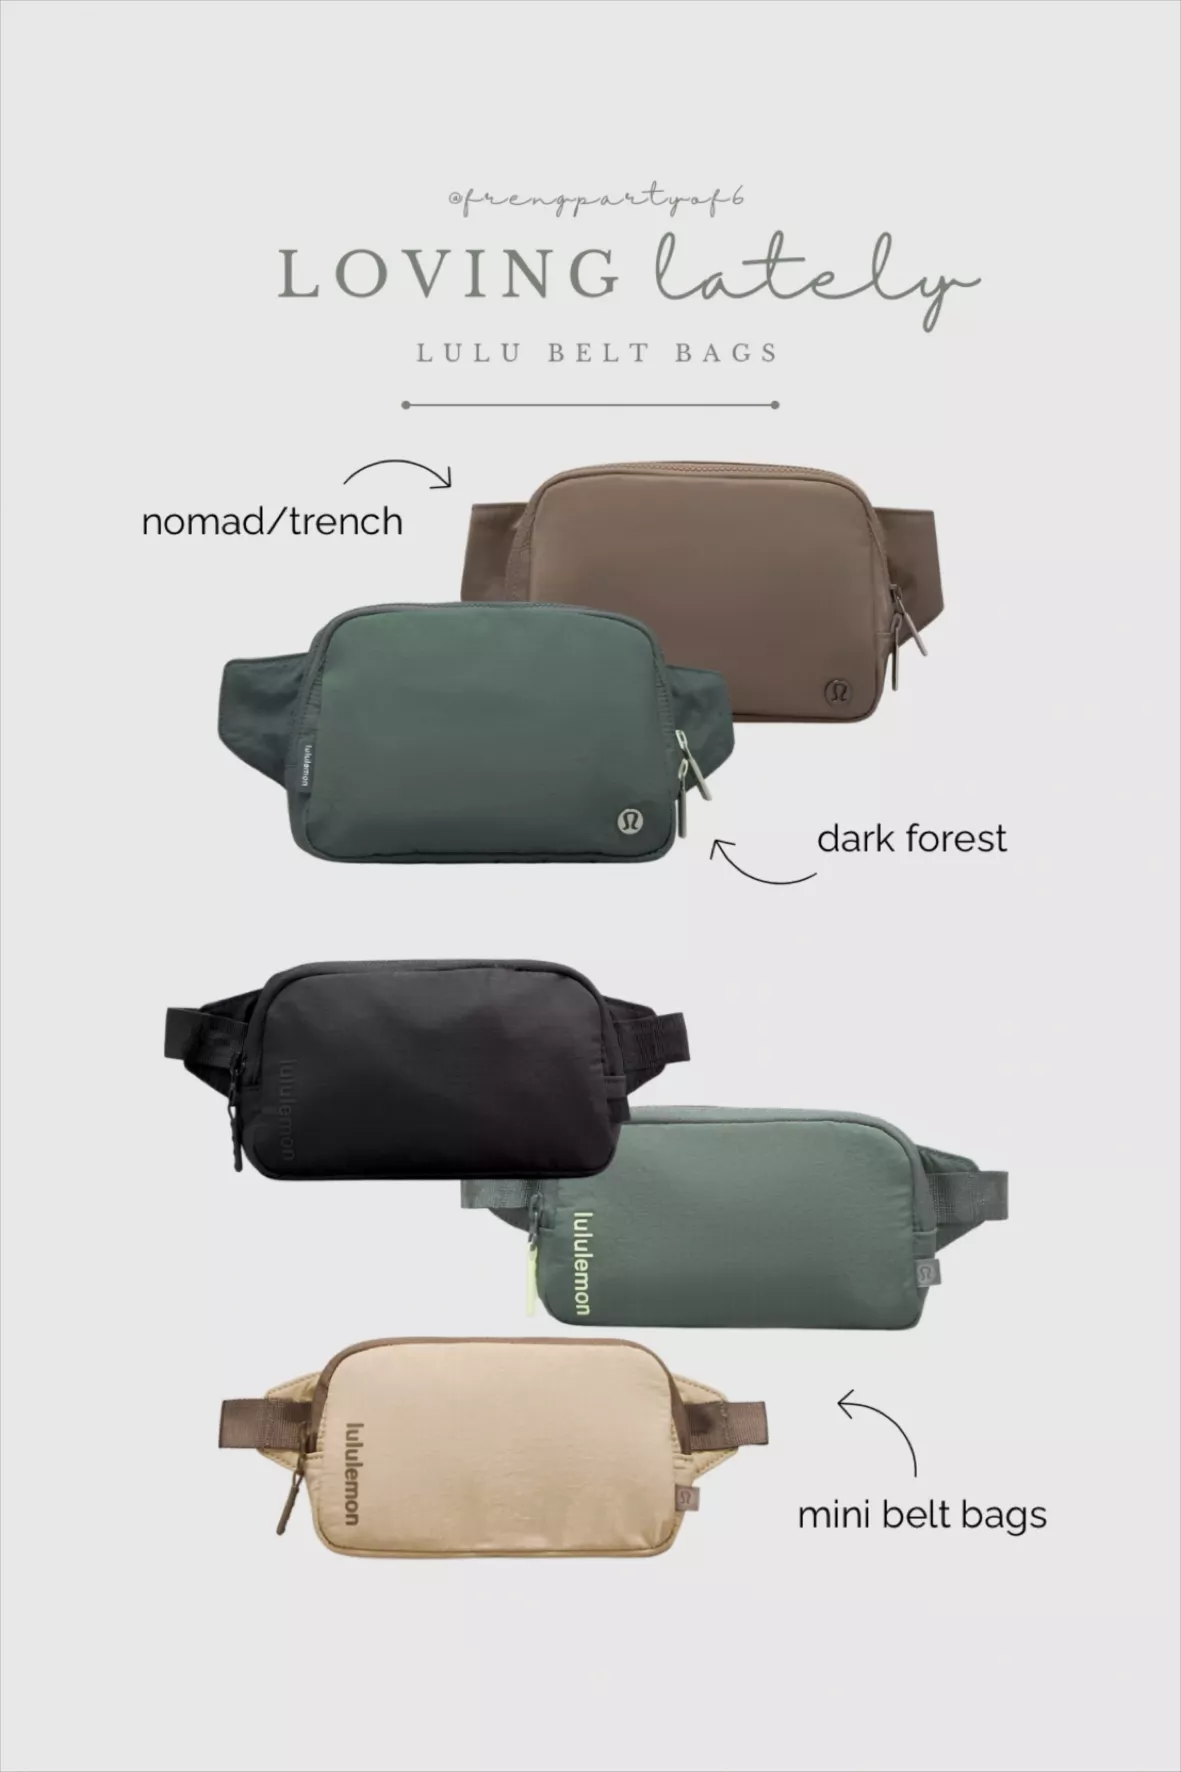 Everywhere Belt Bag Large 2L curated on LTK